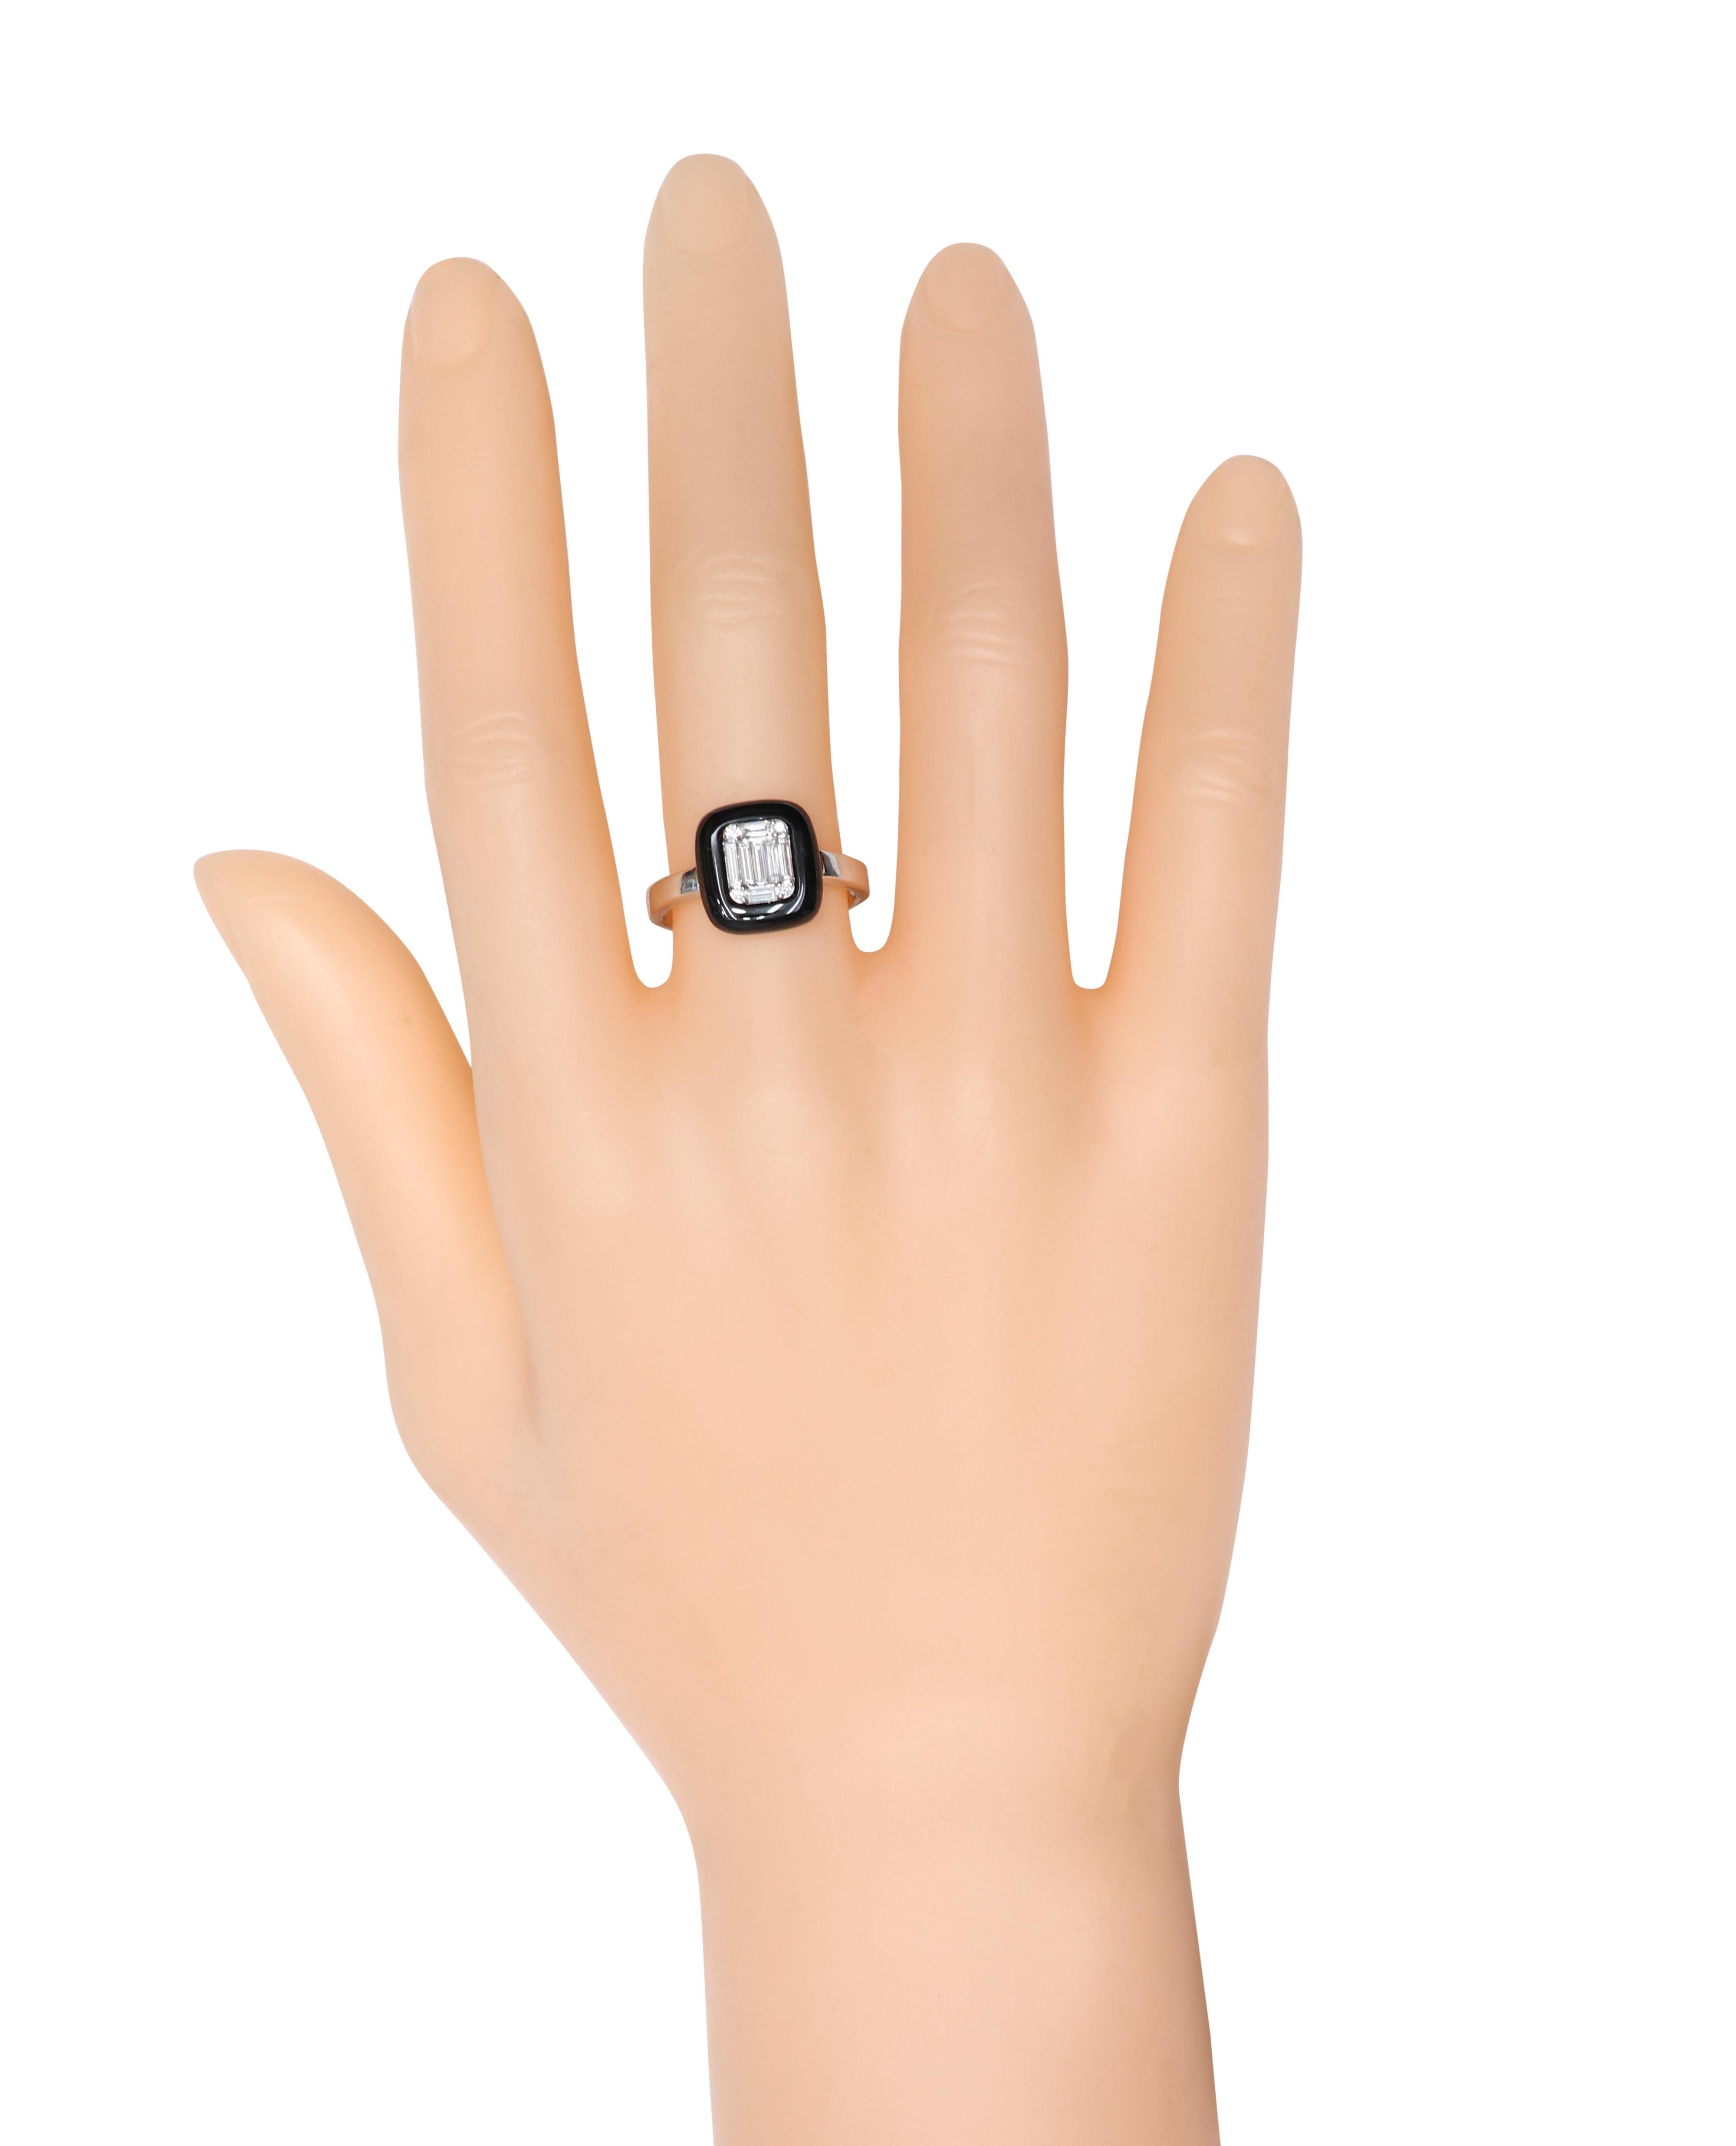 18 Karat White Gold Diamond and Black Onyx Cocktail Ring

This ring offers a beautiful combination of brilliance and craftsmanship. Its design is unique in its own way and will definitely make people ask you questions when you adorn it. This ring